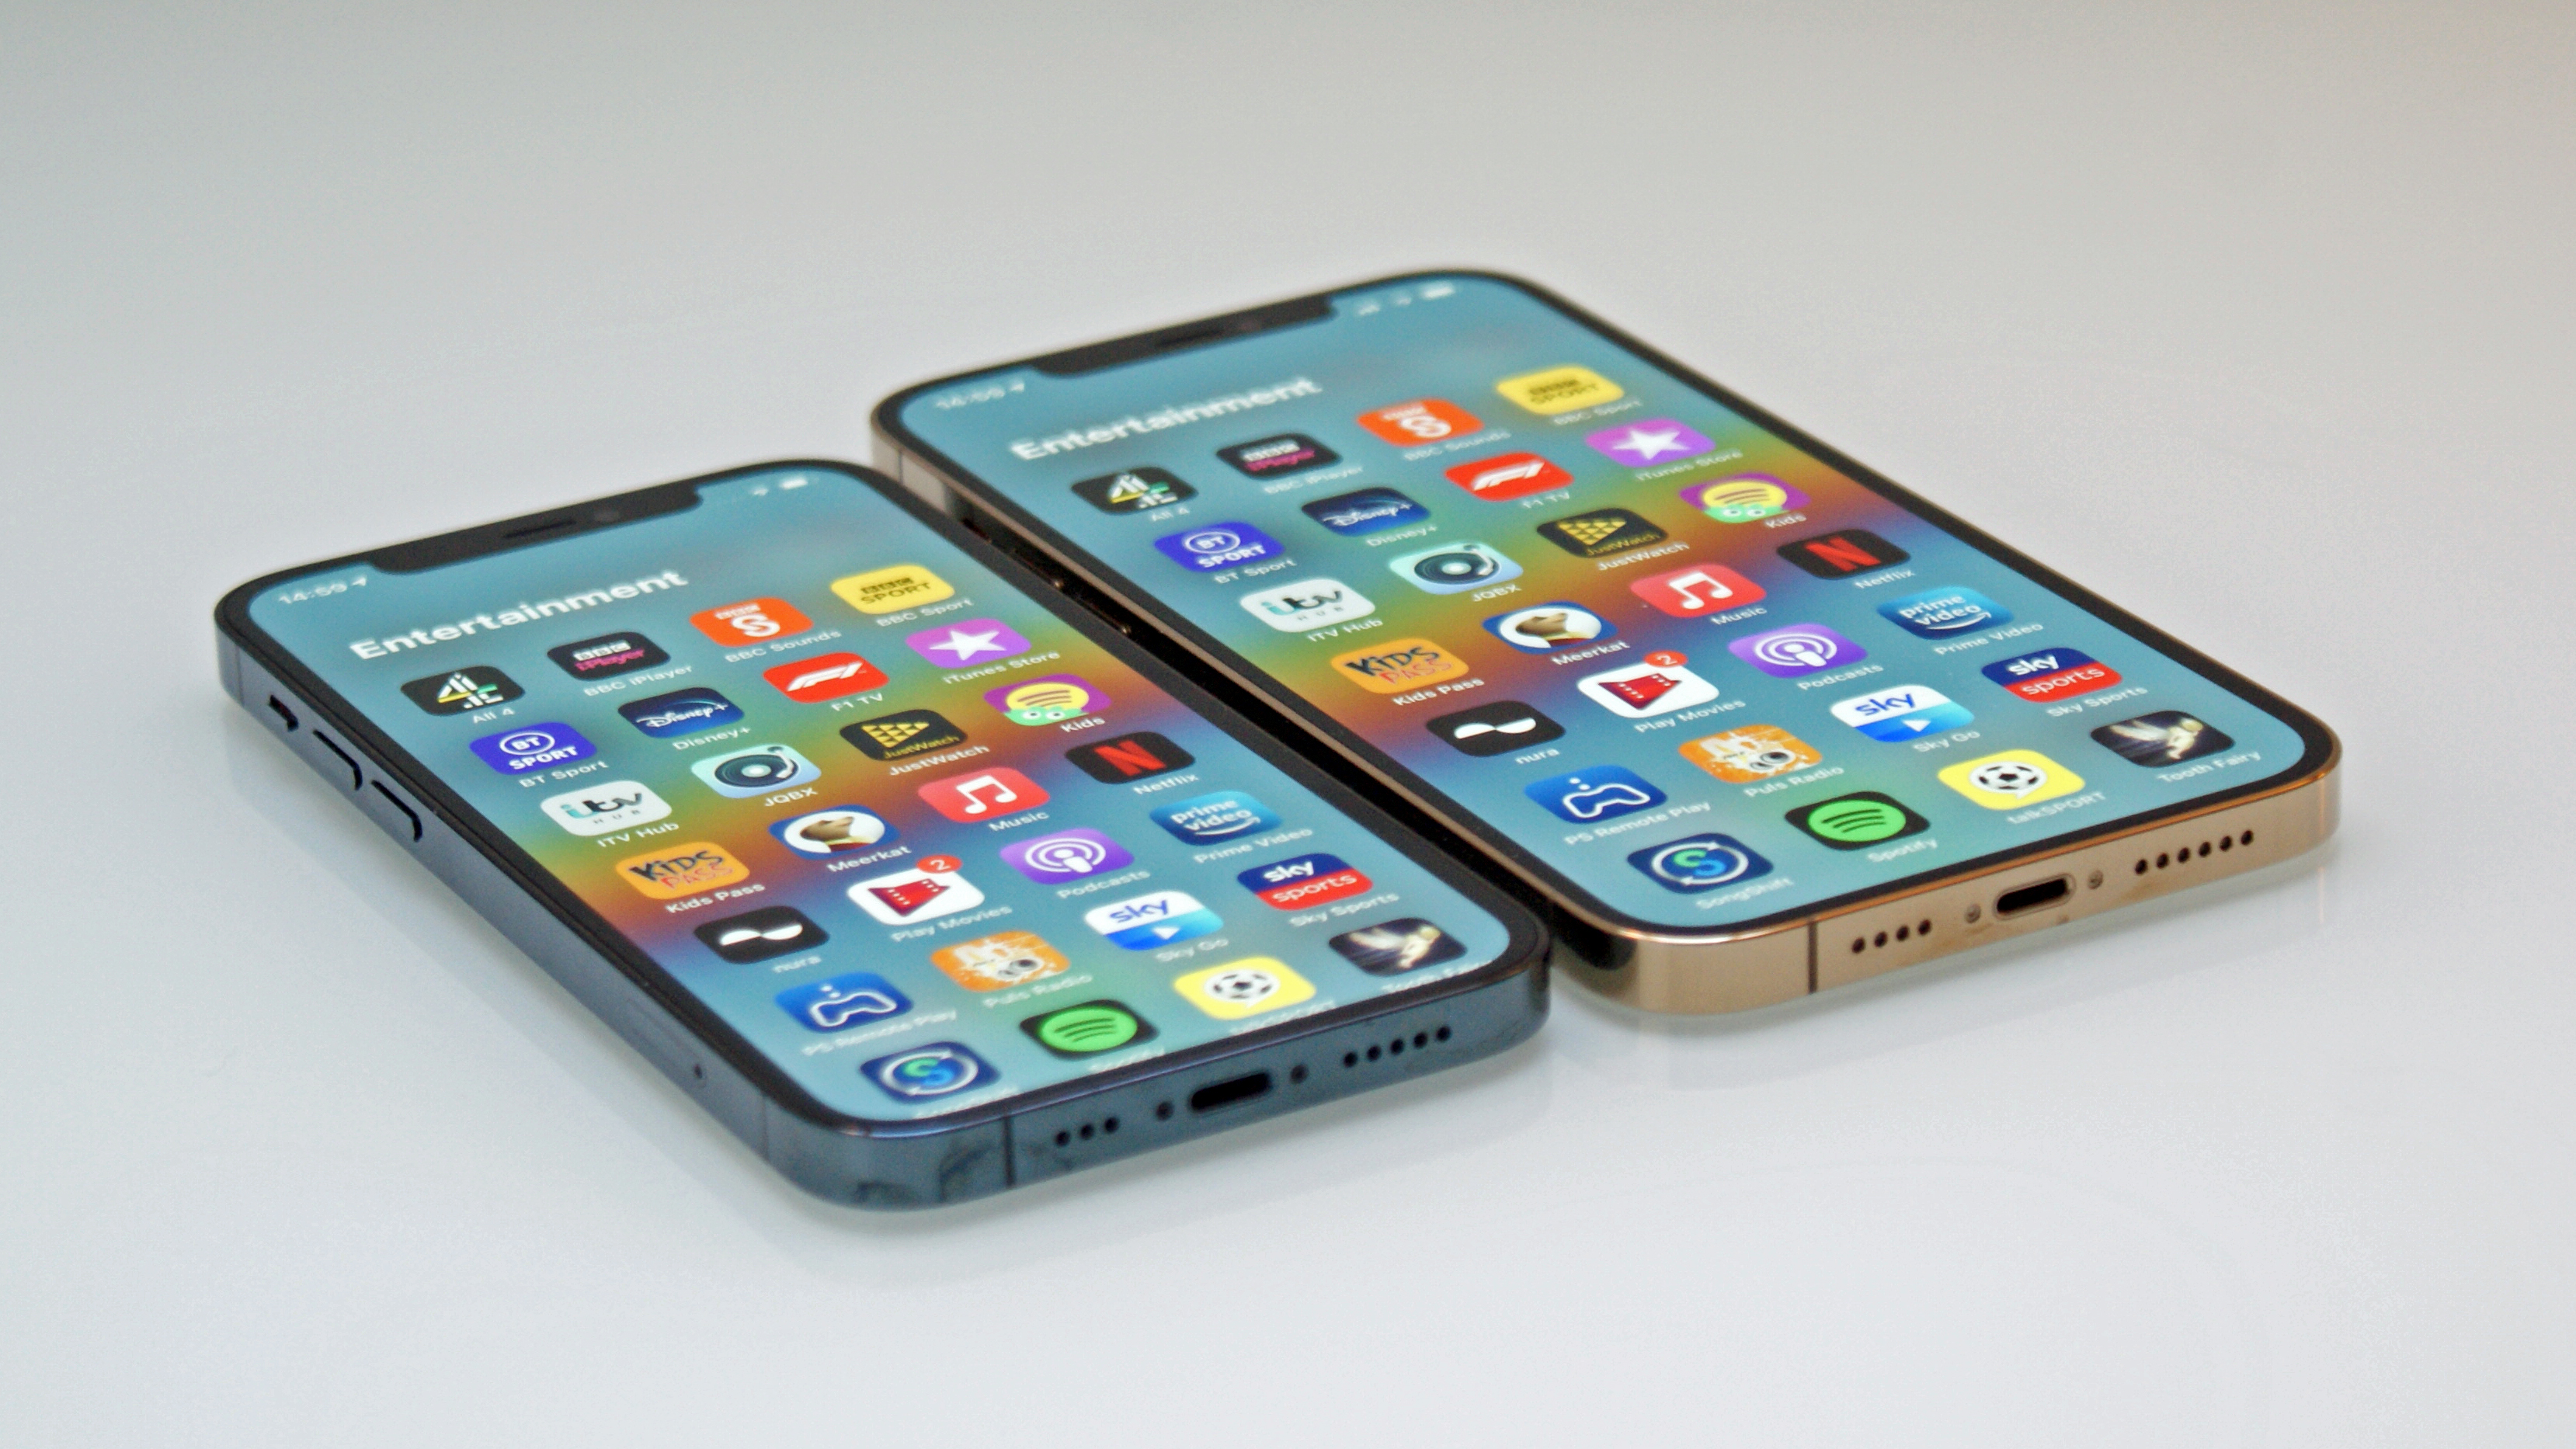 The next major iPhone 5G upgrade is tipped to arrive in 2023 TechRadar